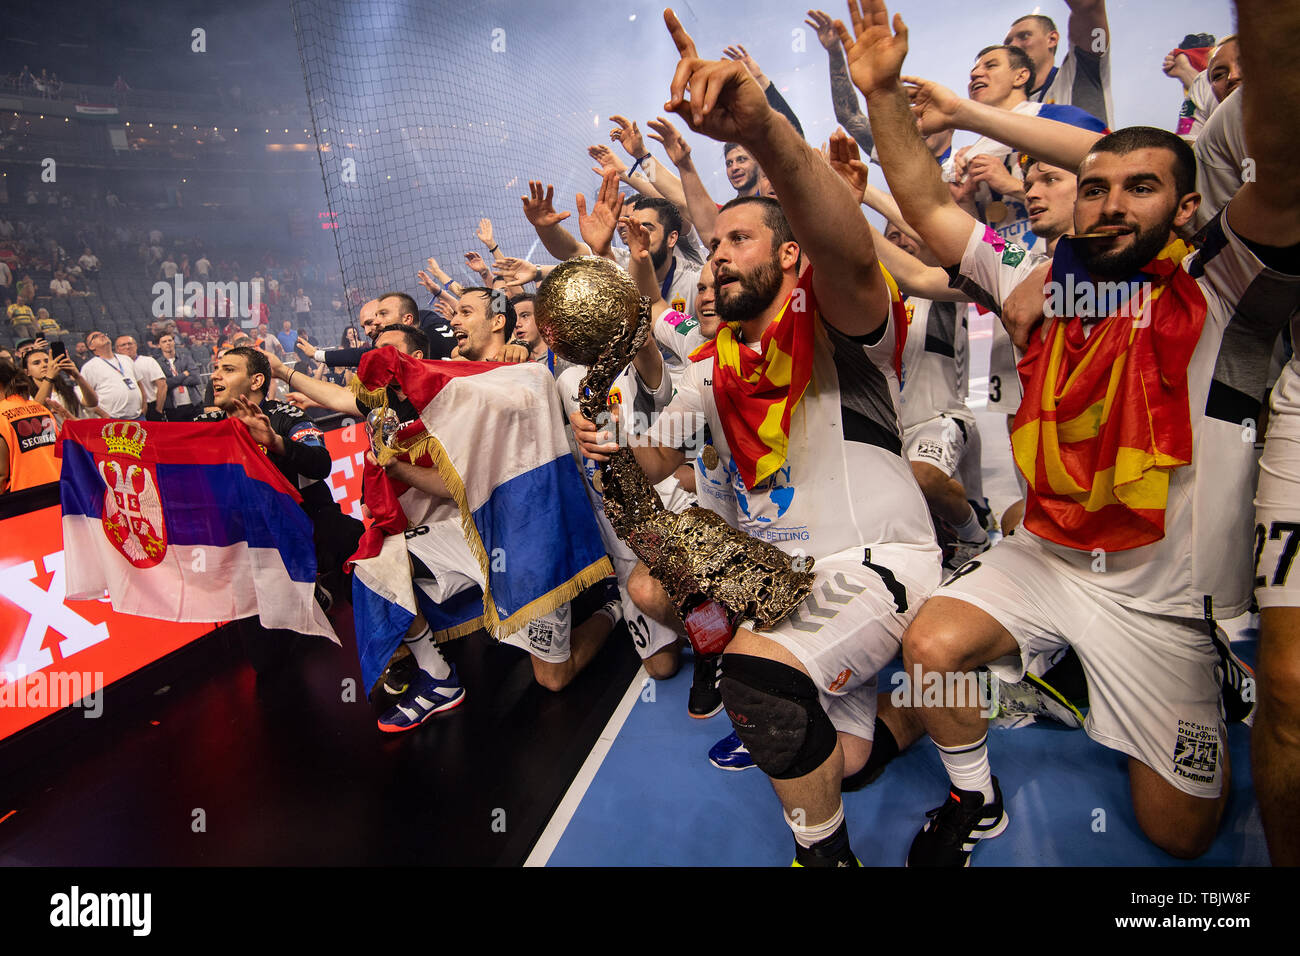 Cologne, Germany. 02nd June, 2019. Handball: Champions League, Vardar  Skopje - Telekom Veszprem, Final Round, Final Four, Final. Vadar's team  celebrate with the trophy Stojanche Stoilov holds in his hand. Credit:  Marius